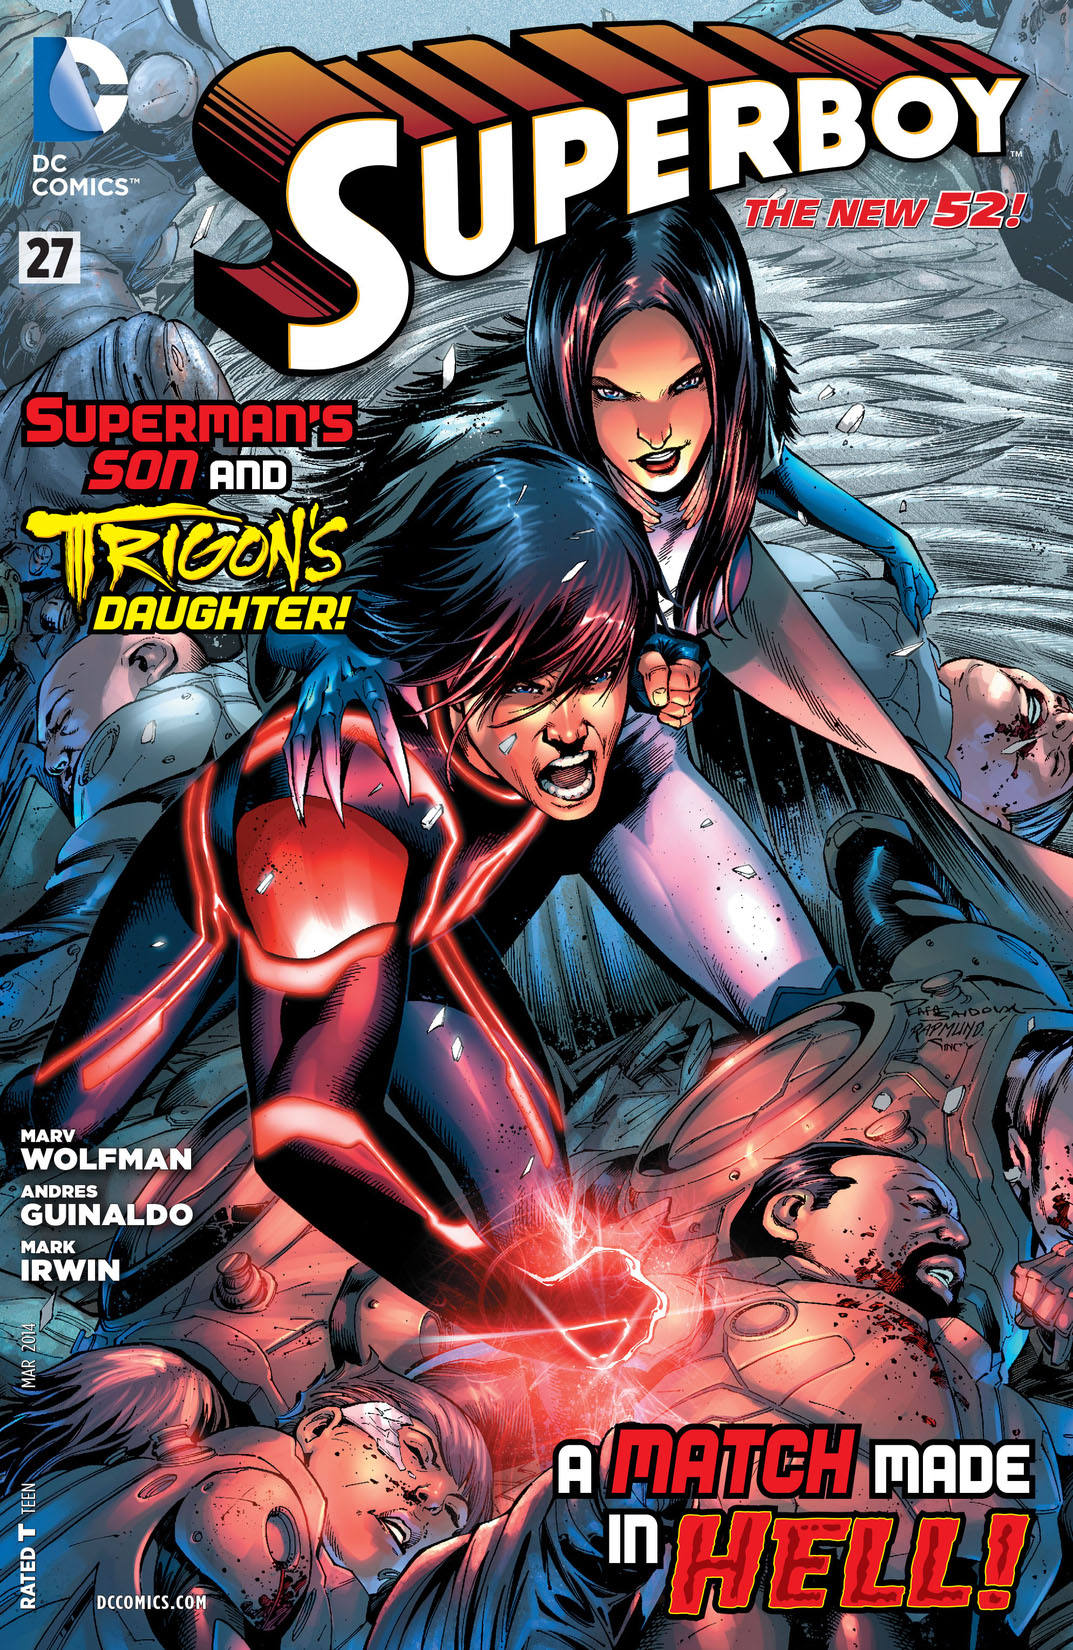 Superboy (2011-) #27 preview images